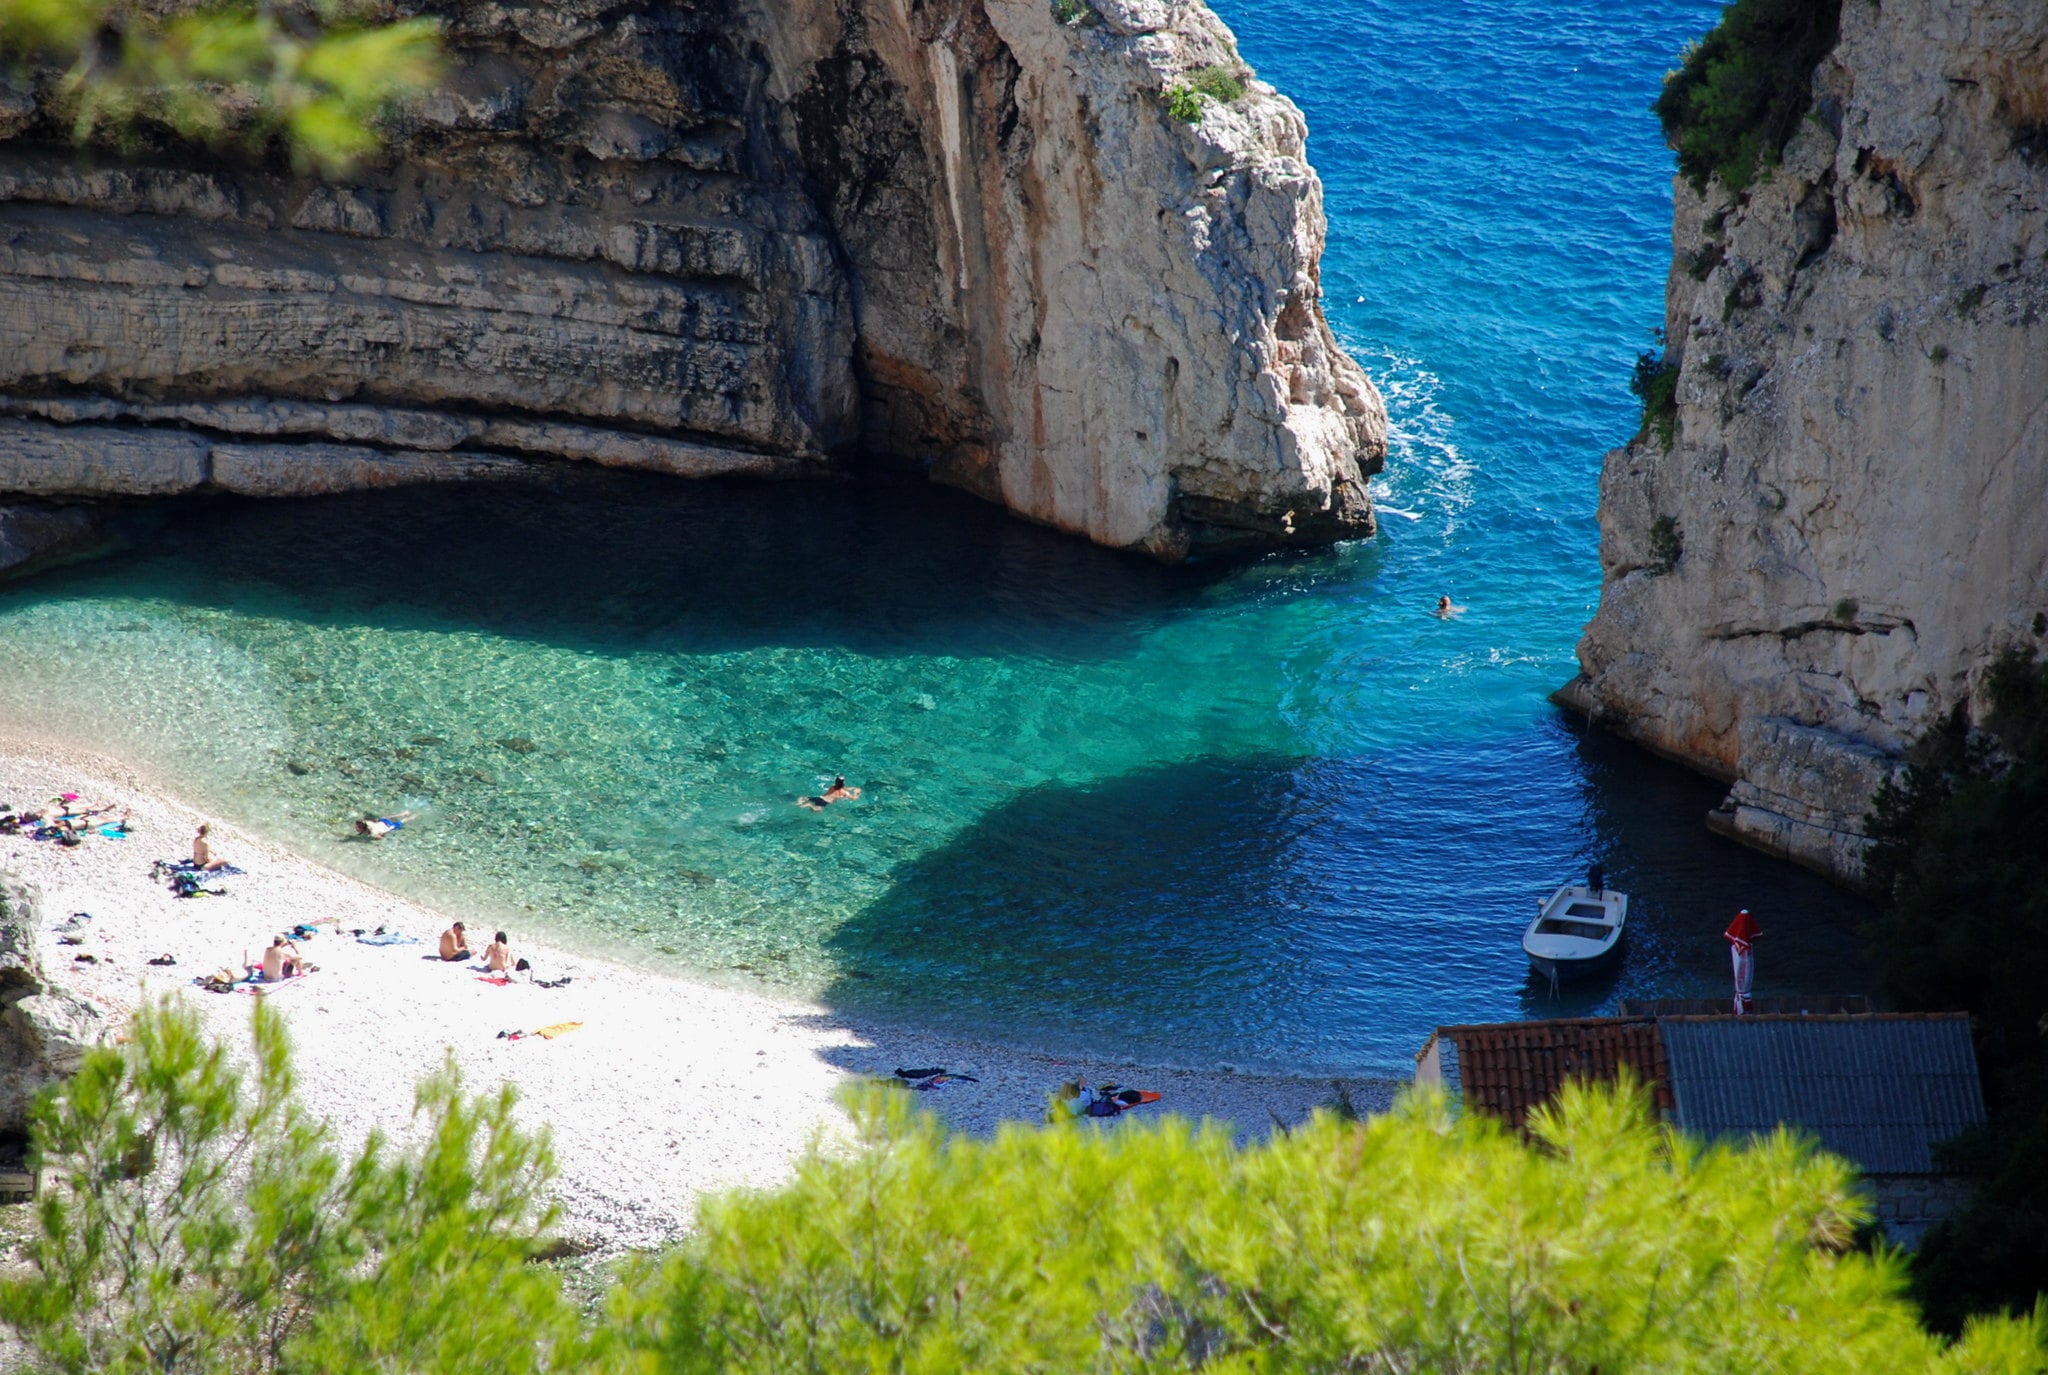 Stiniva Beach is one of the most beautiful places to visit in Croatia